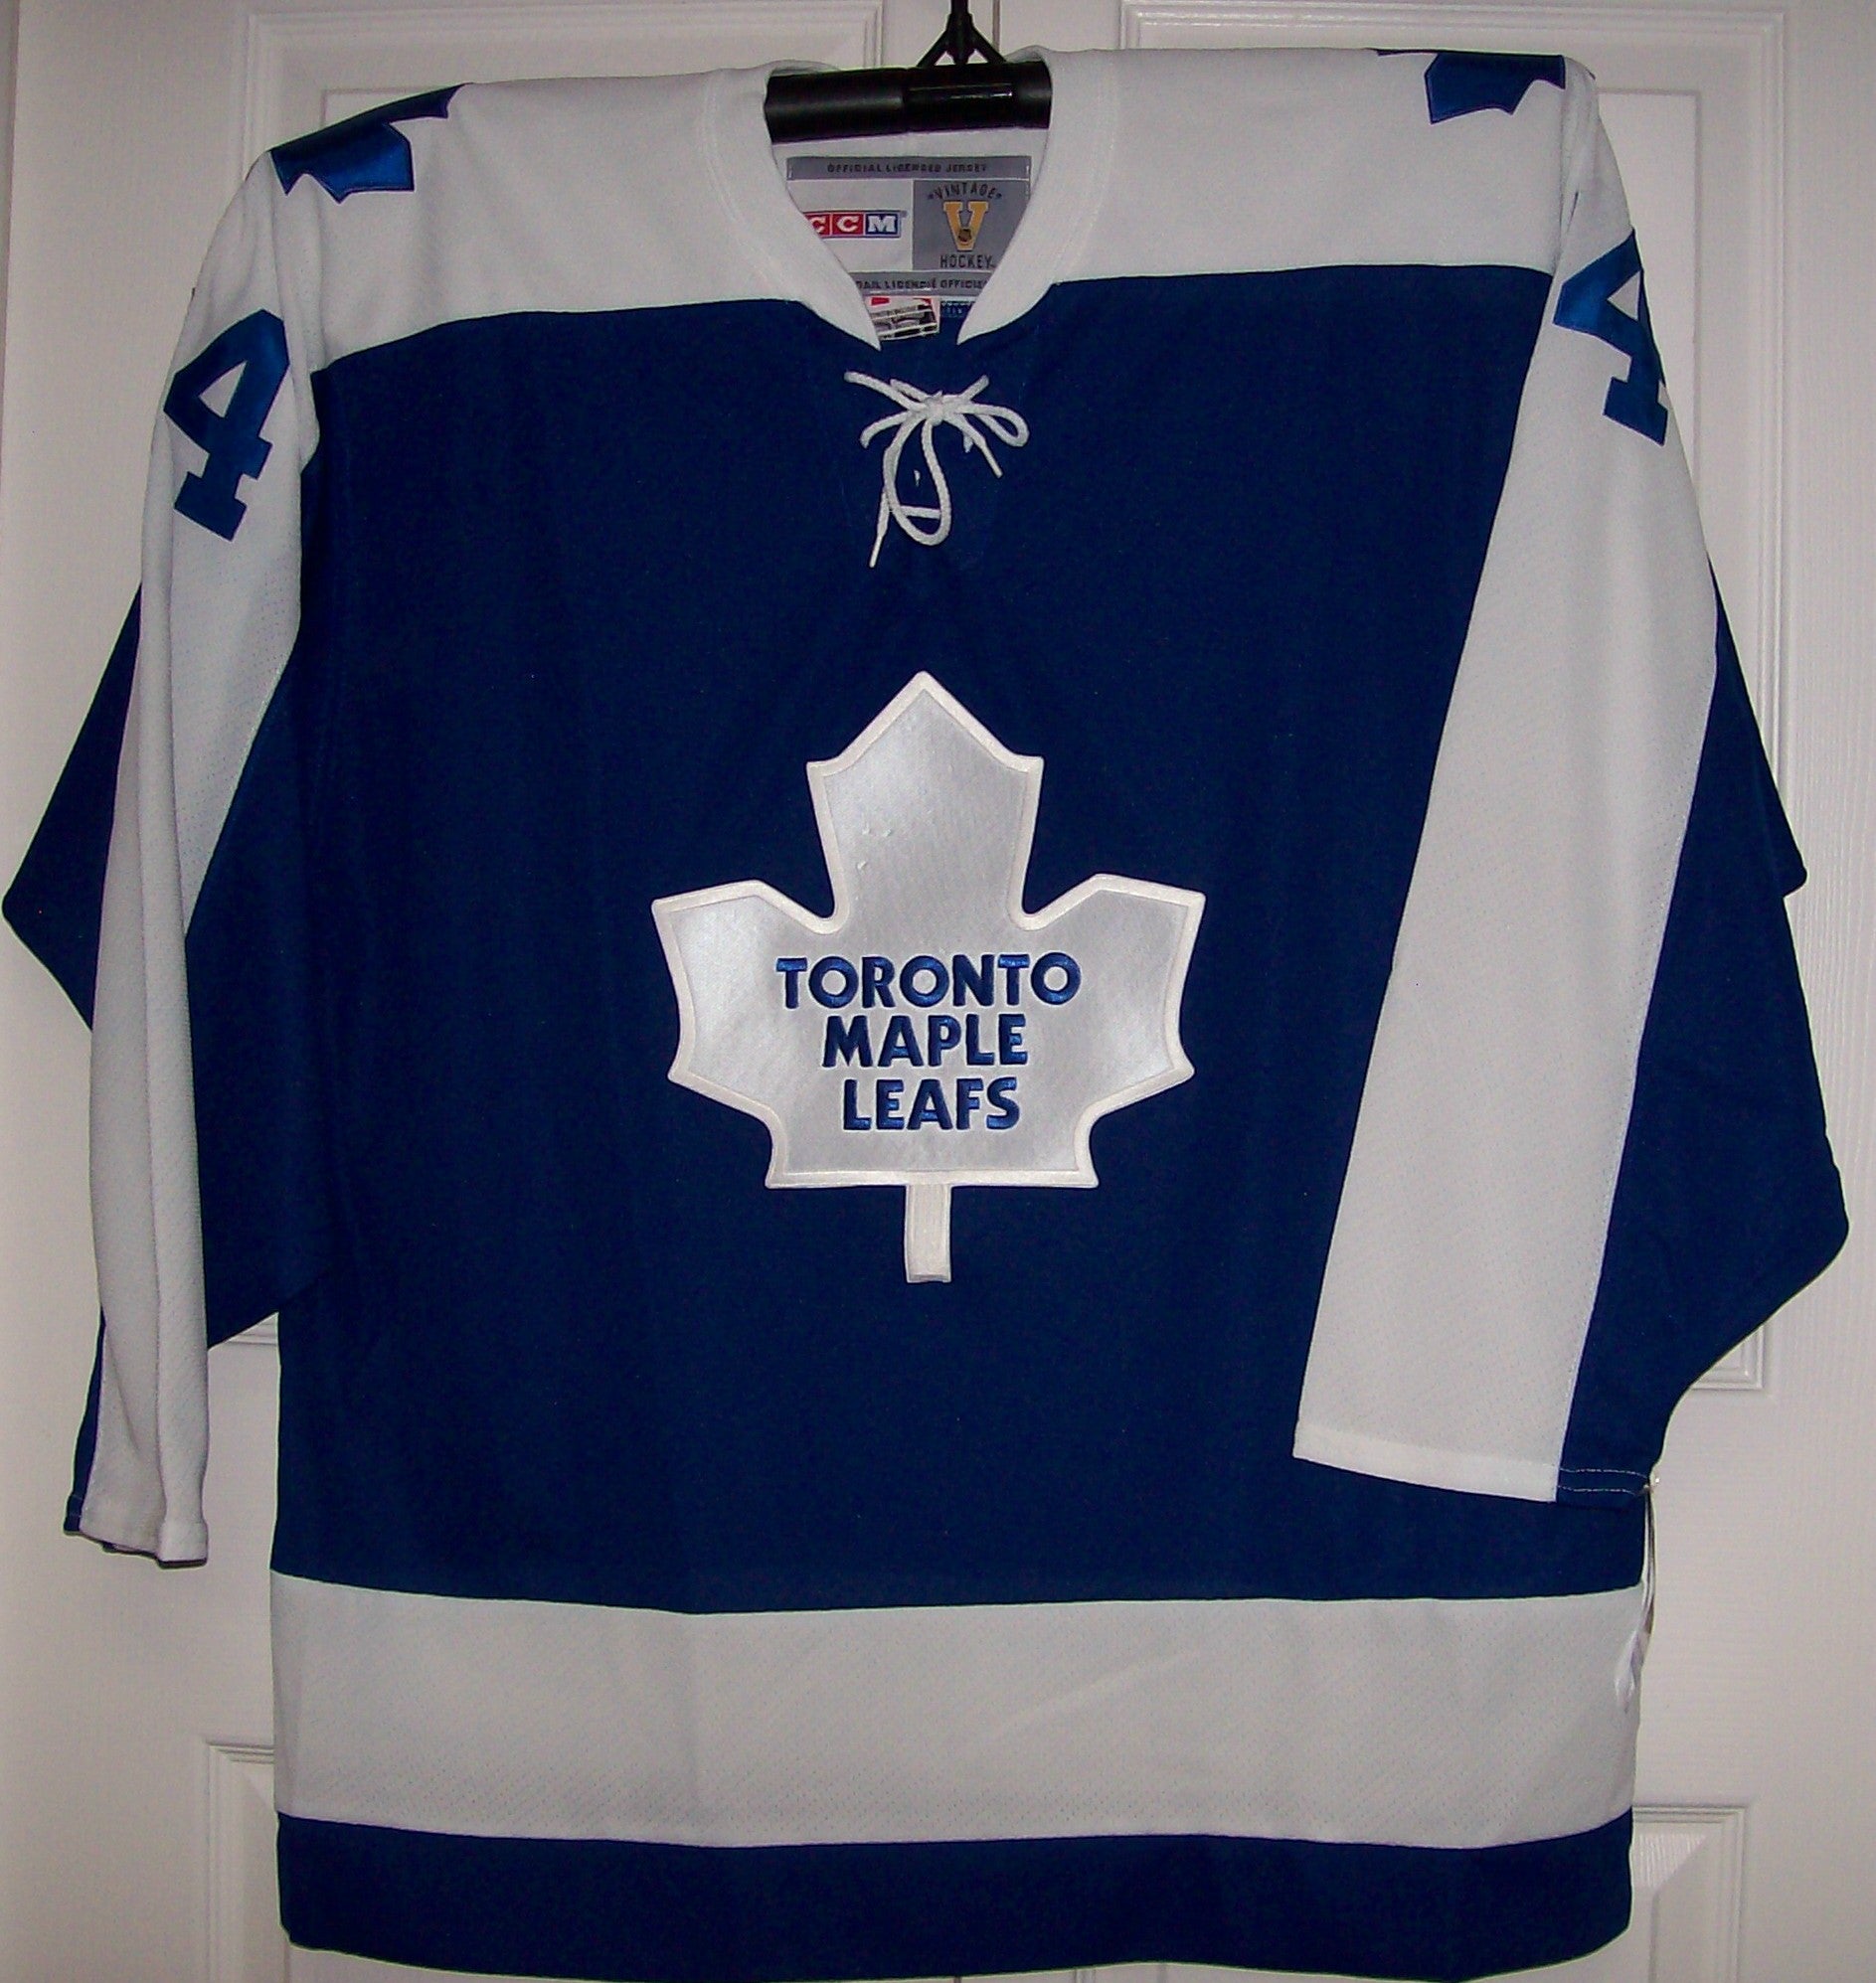 hockey jersey with laces